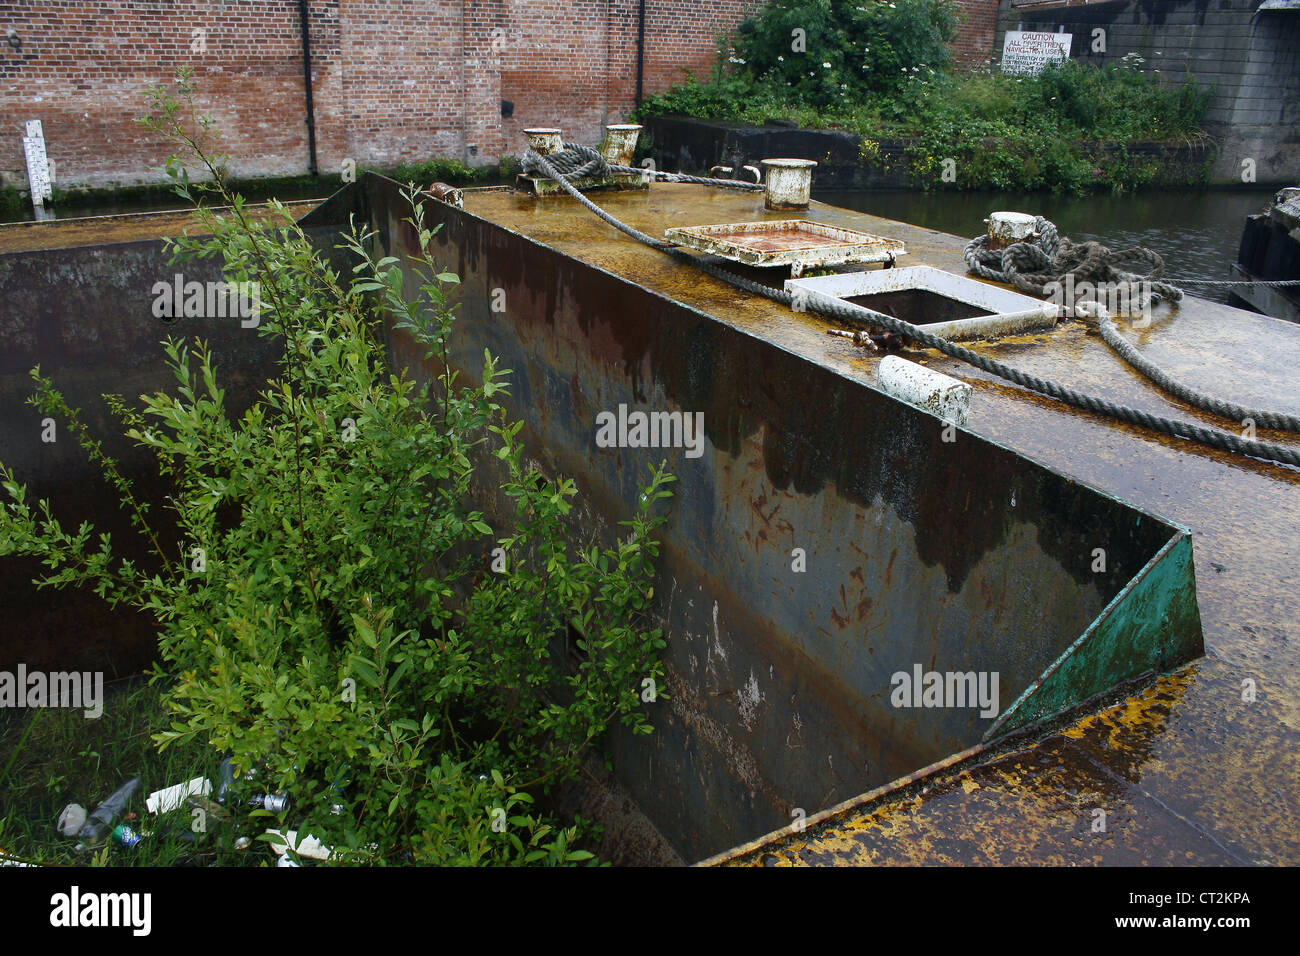 plants growing in disused boat on river trent Stock Photo